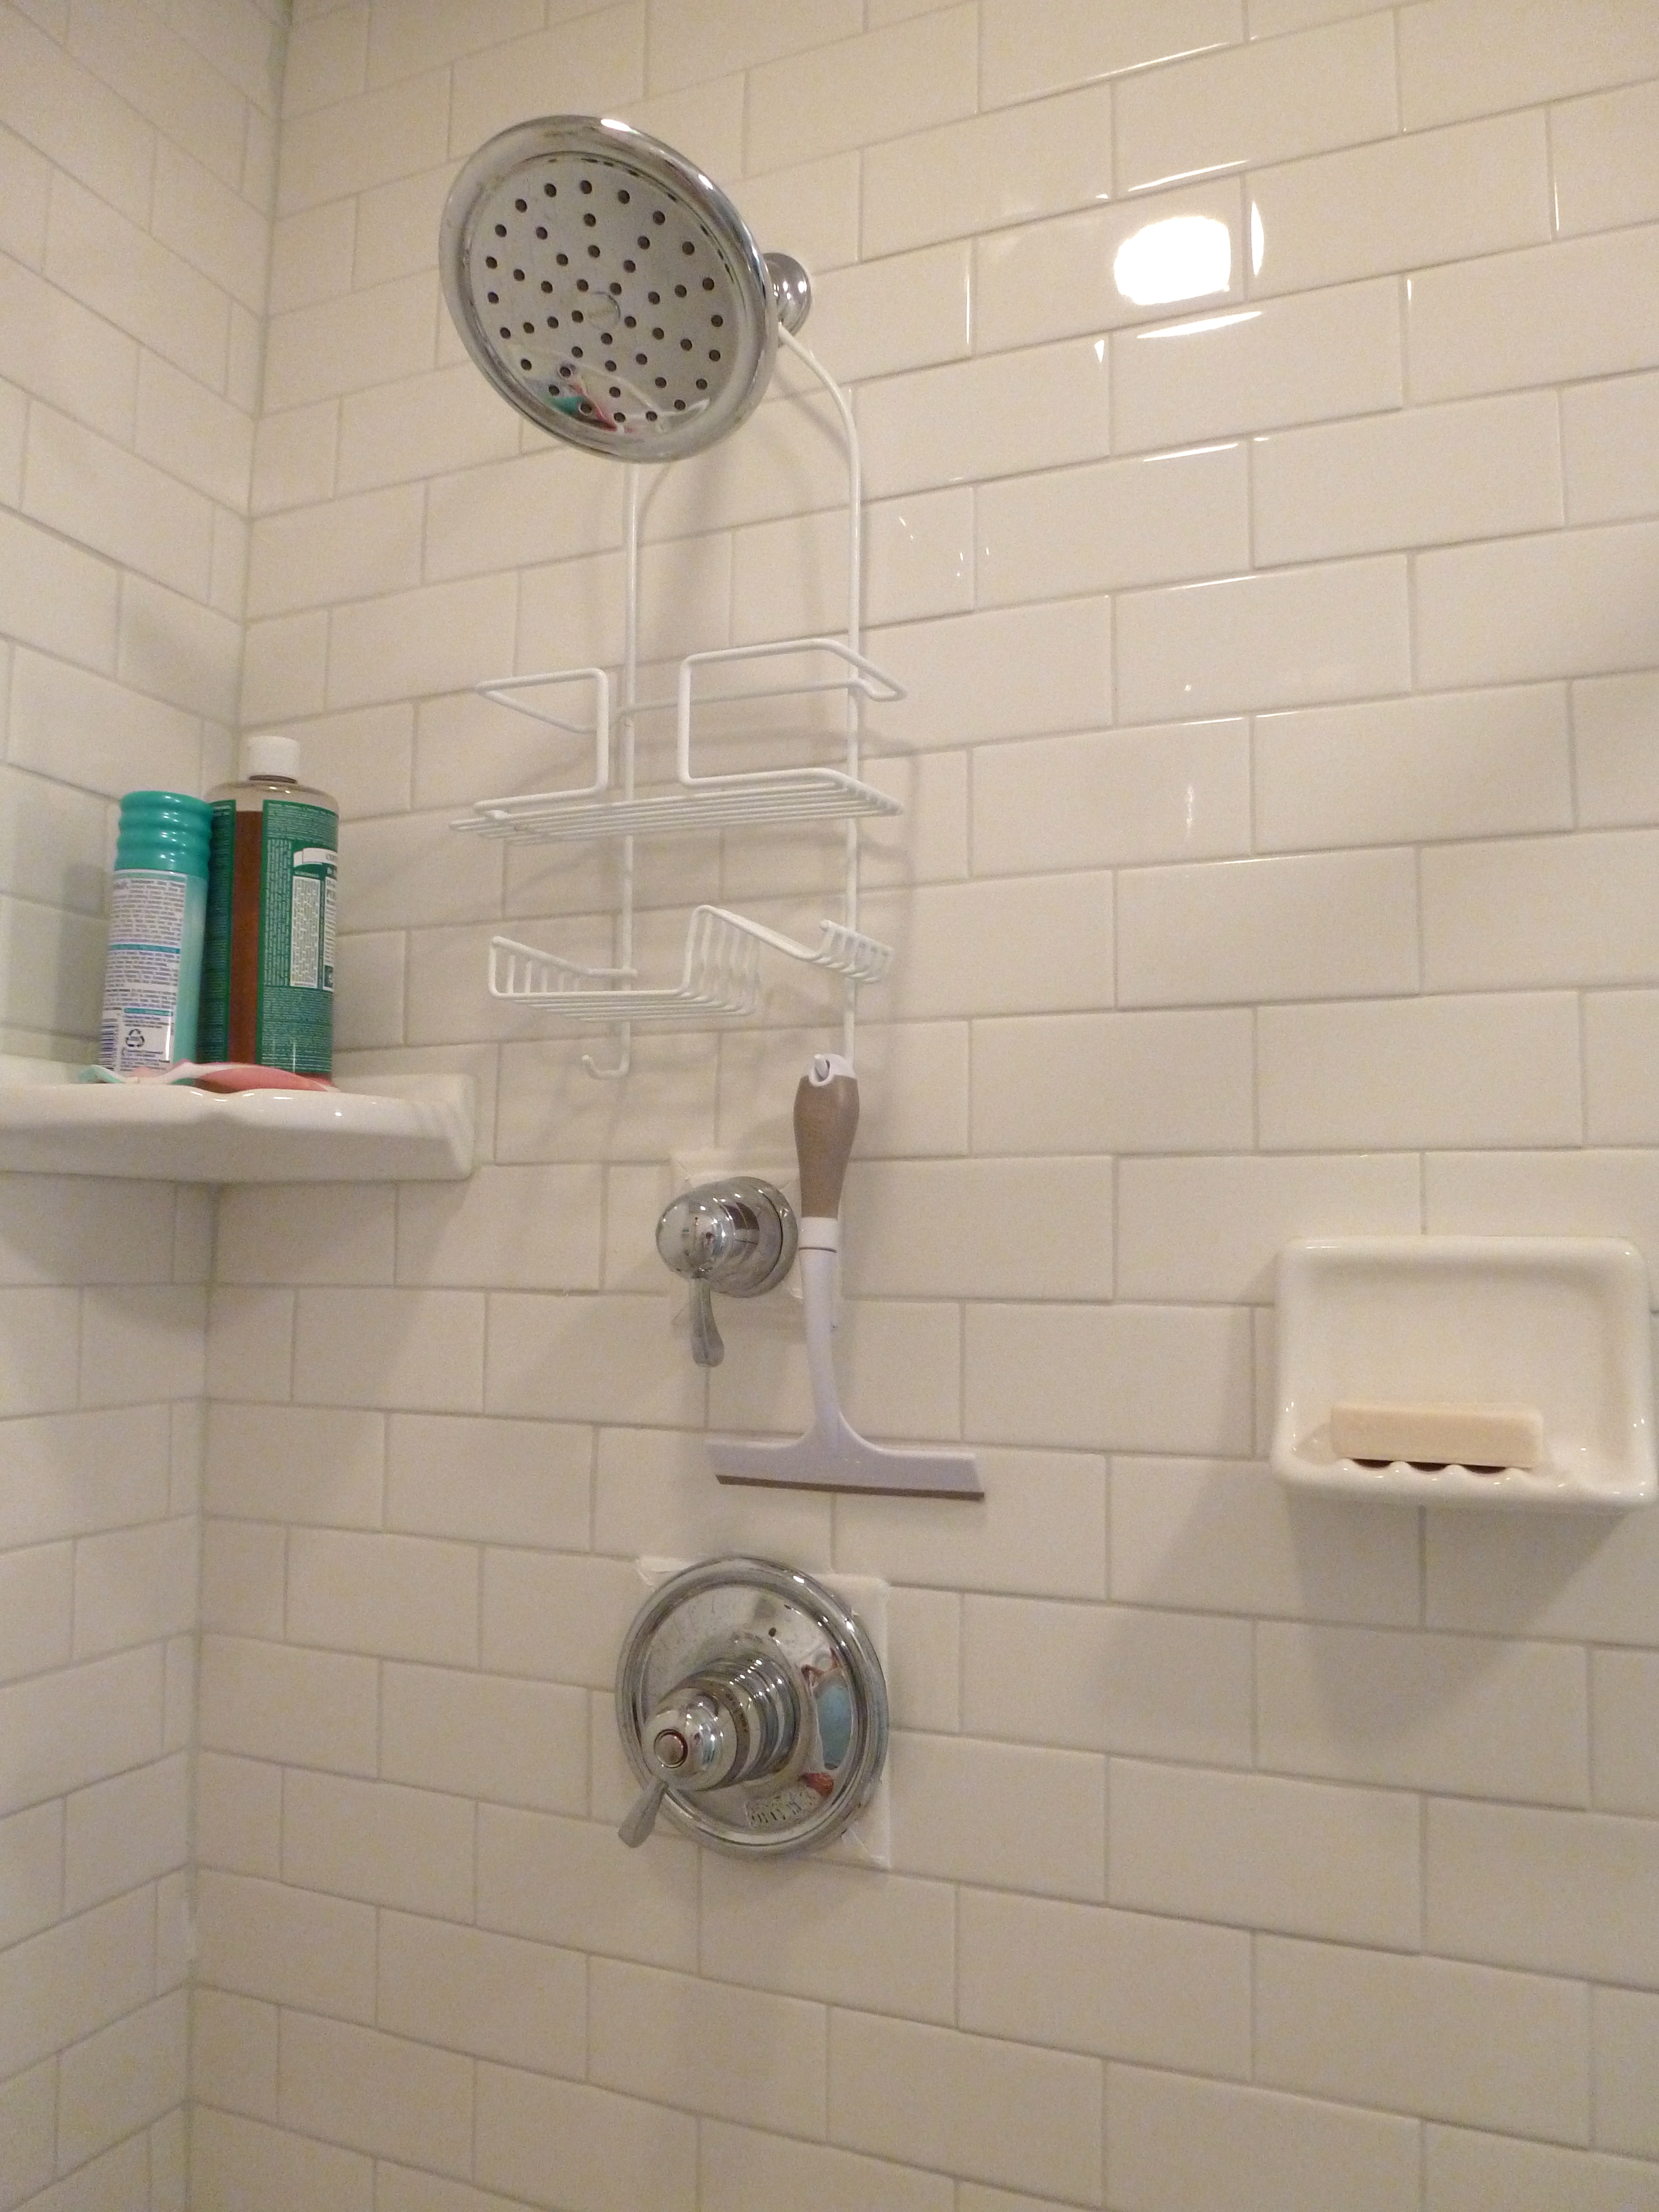 subway tile – Tell'er All About It